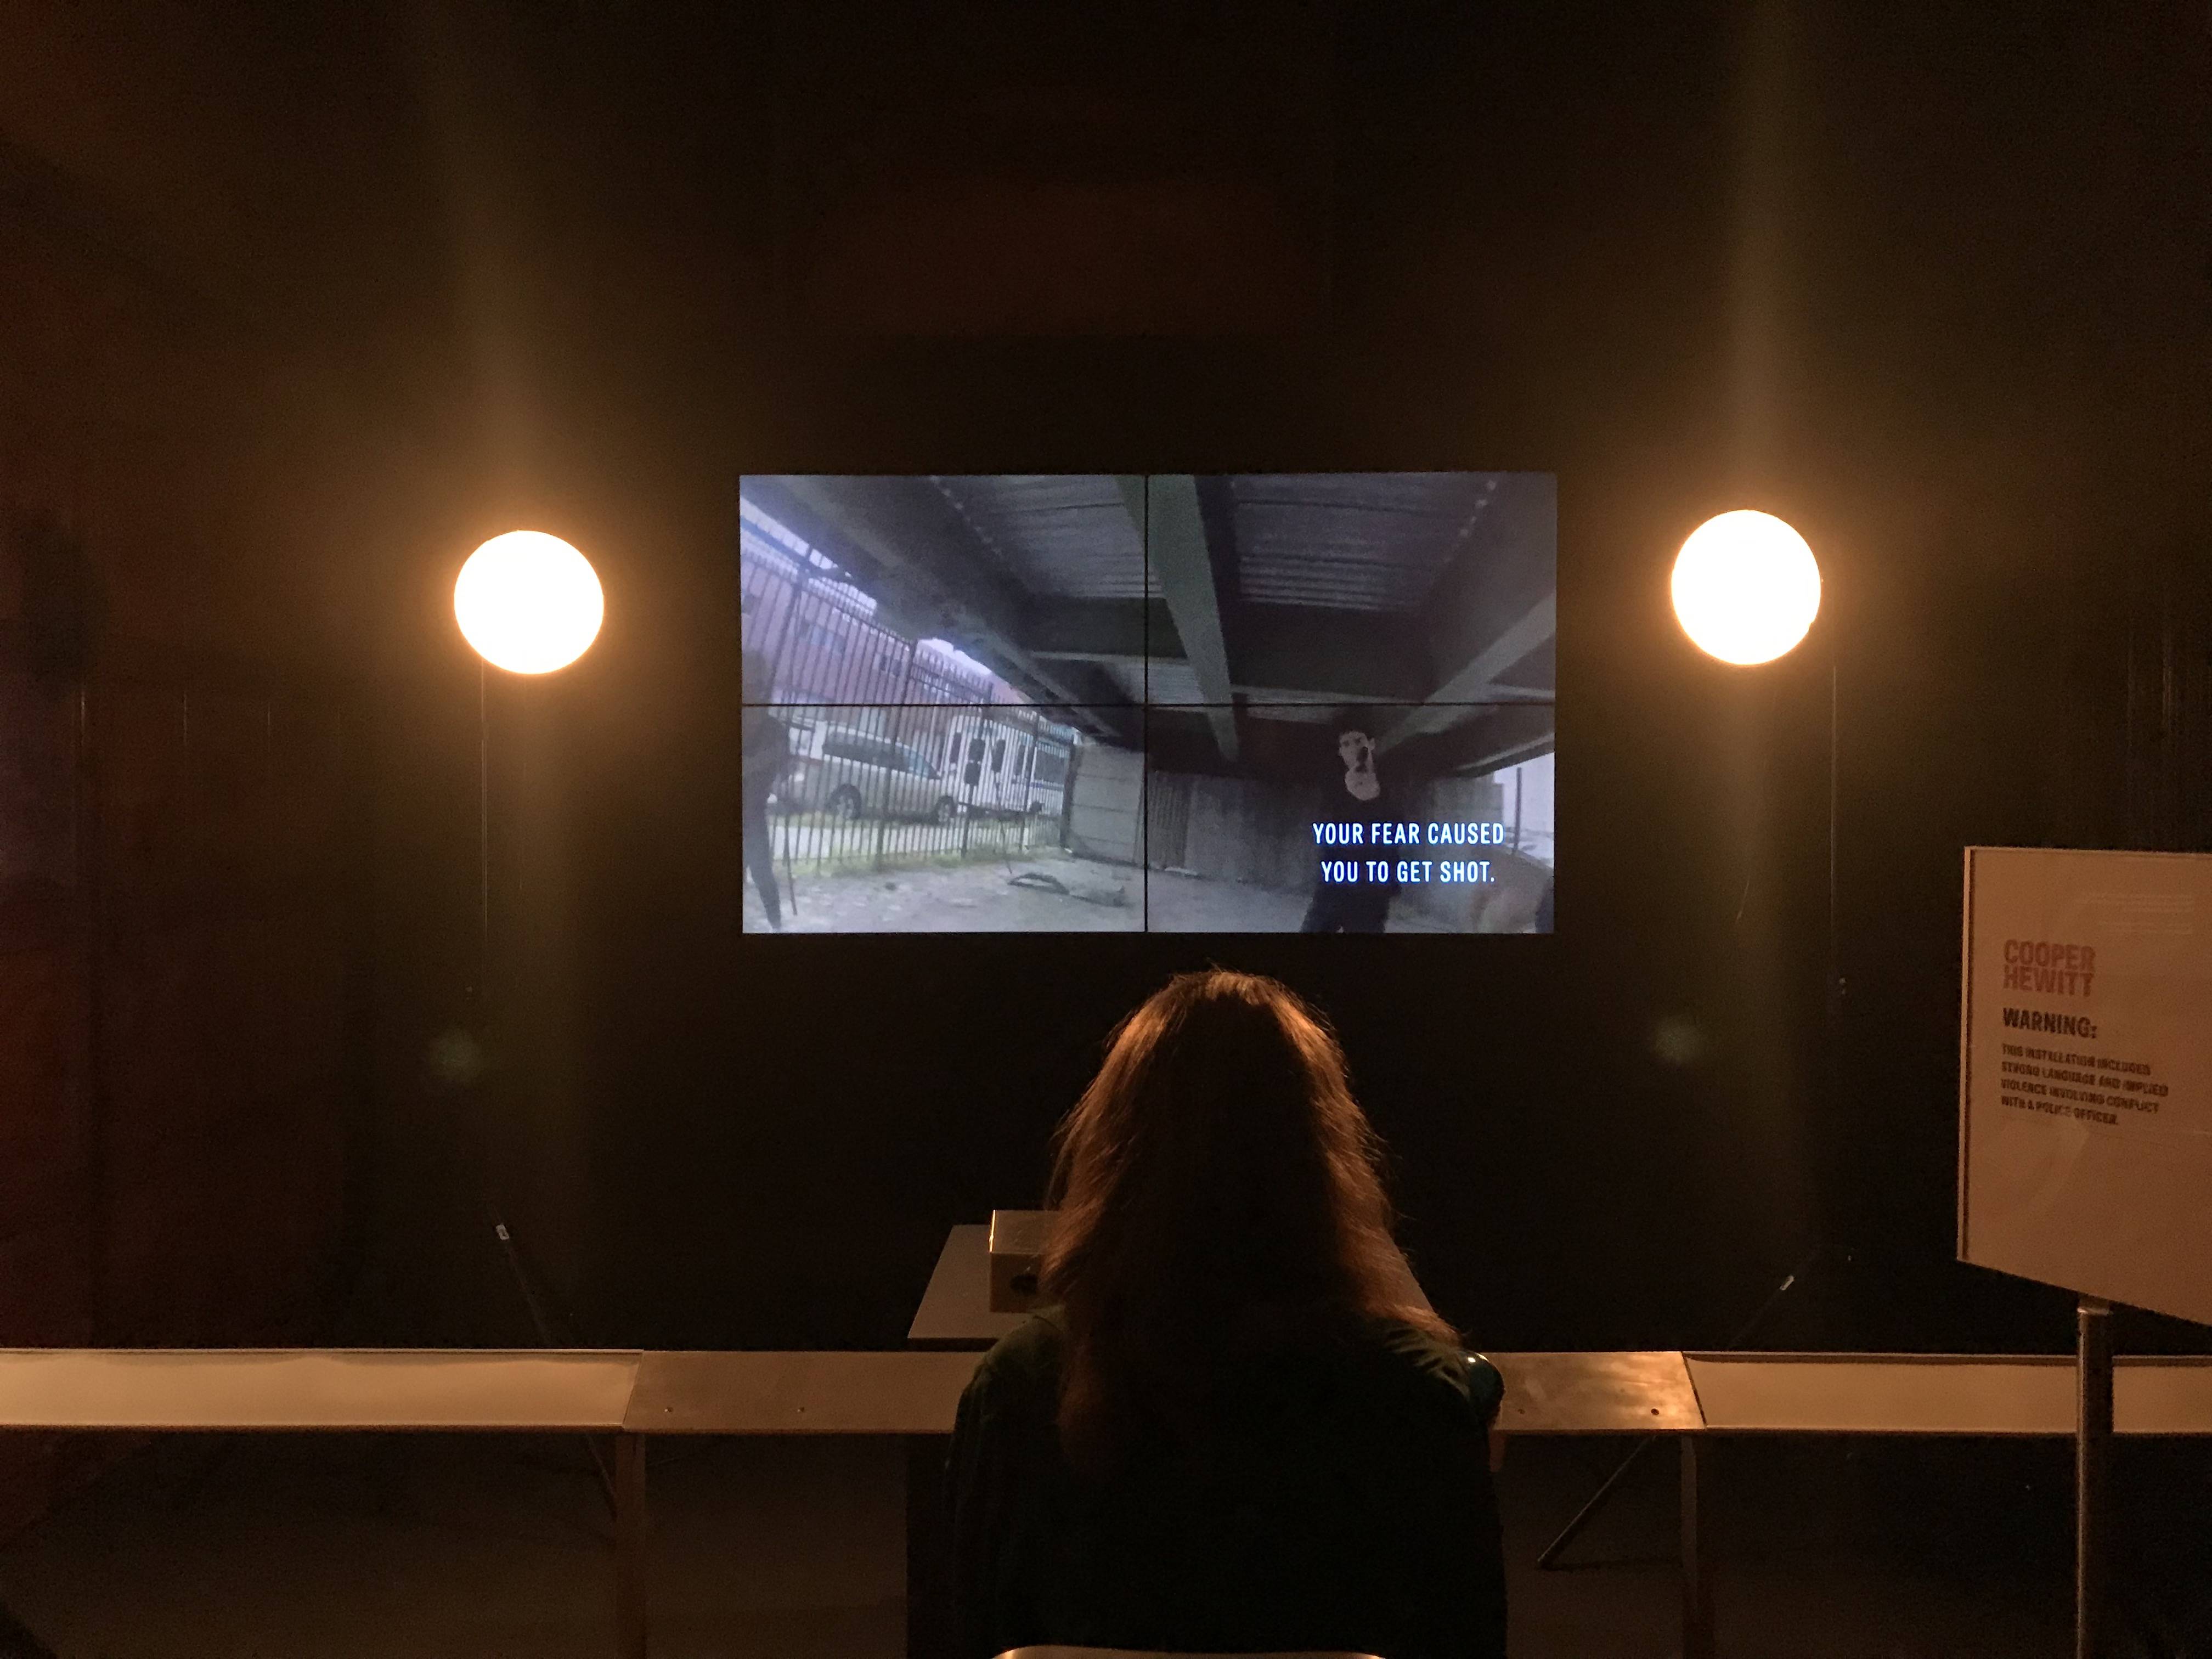 A woman watching the installation in a dark room